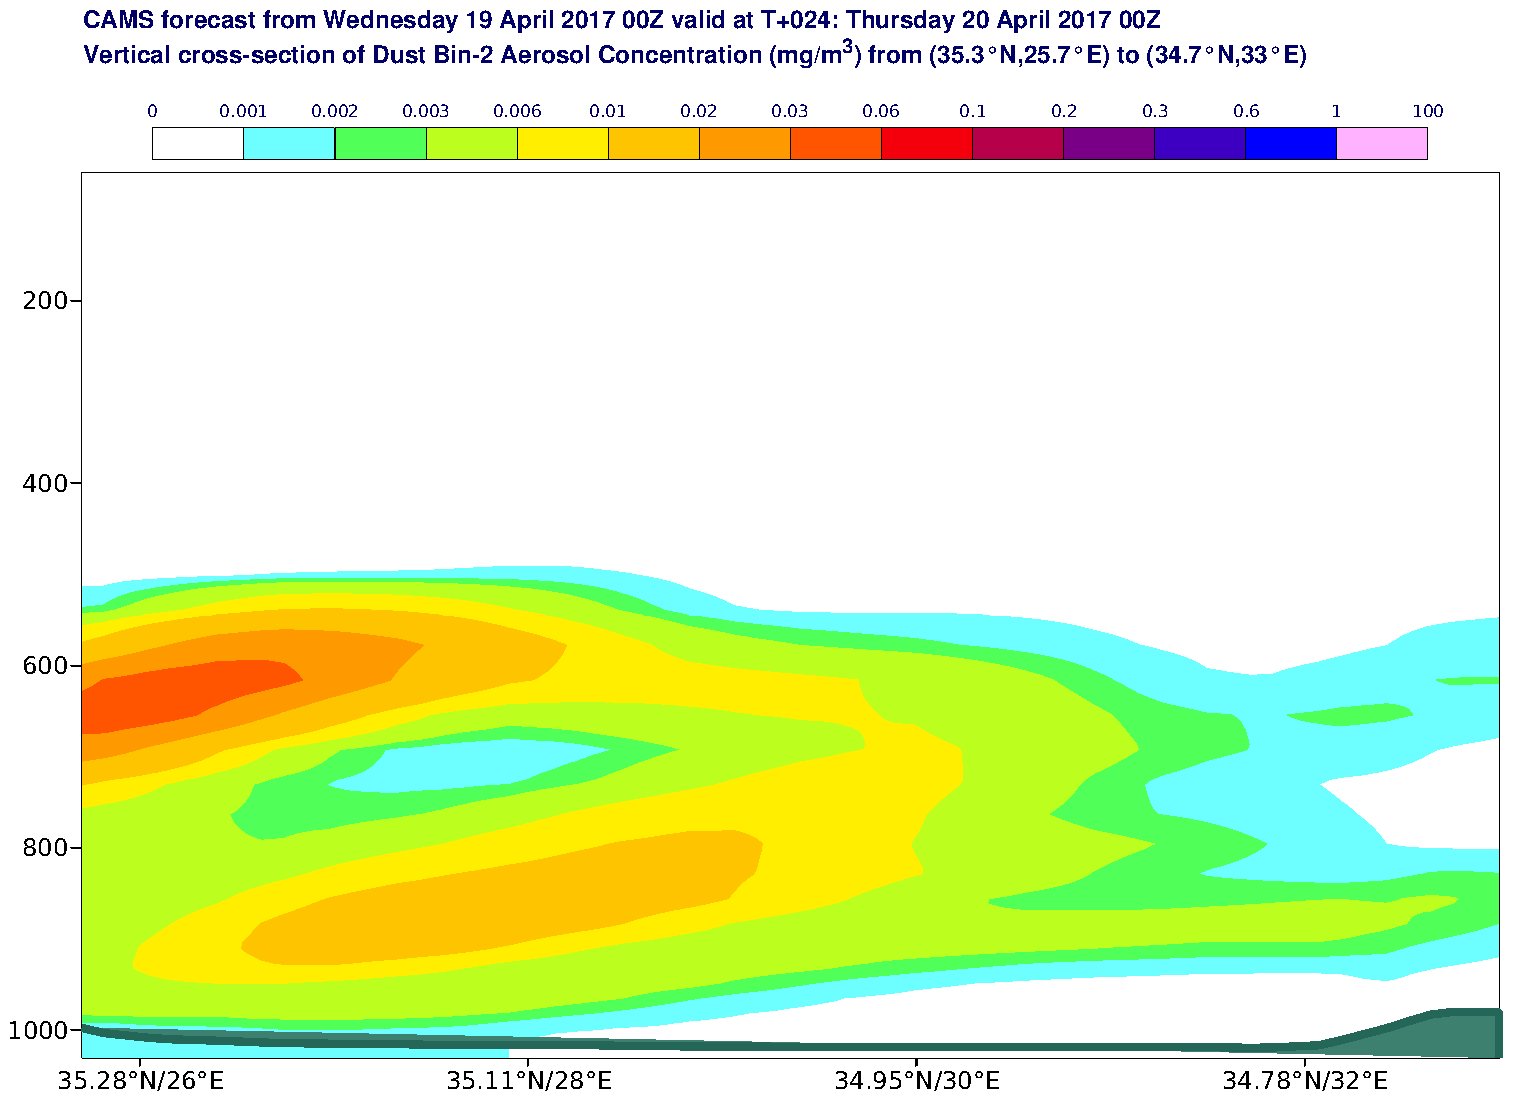 Vertical cross-section of Dust Bin-2 Aerosol Concentration (mg/m3) valid at T24 - 2017-04-20 00:00